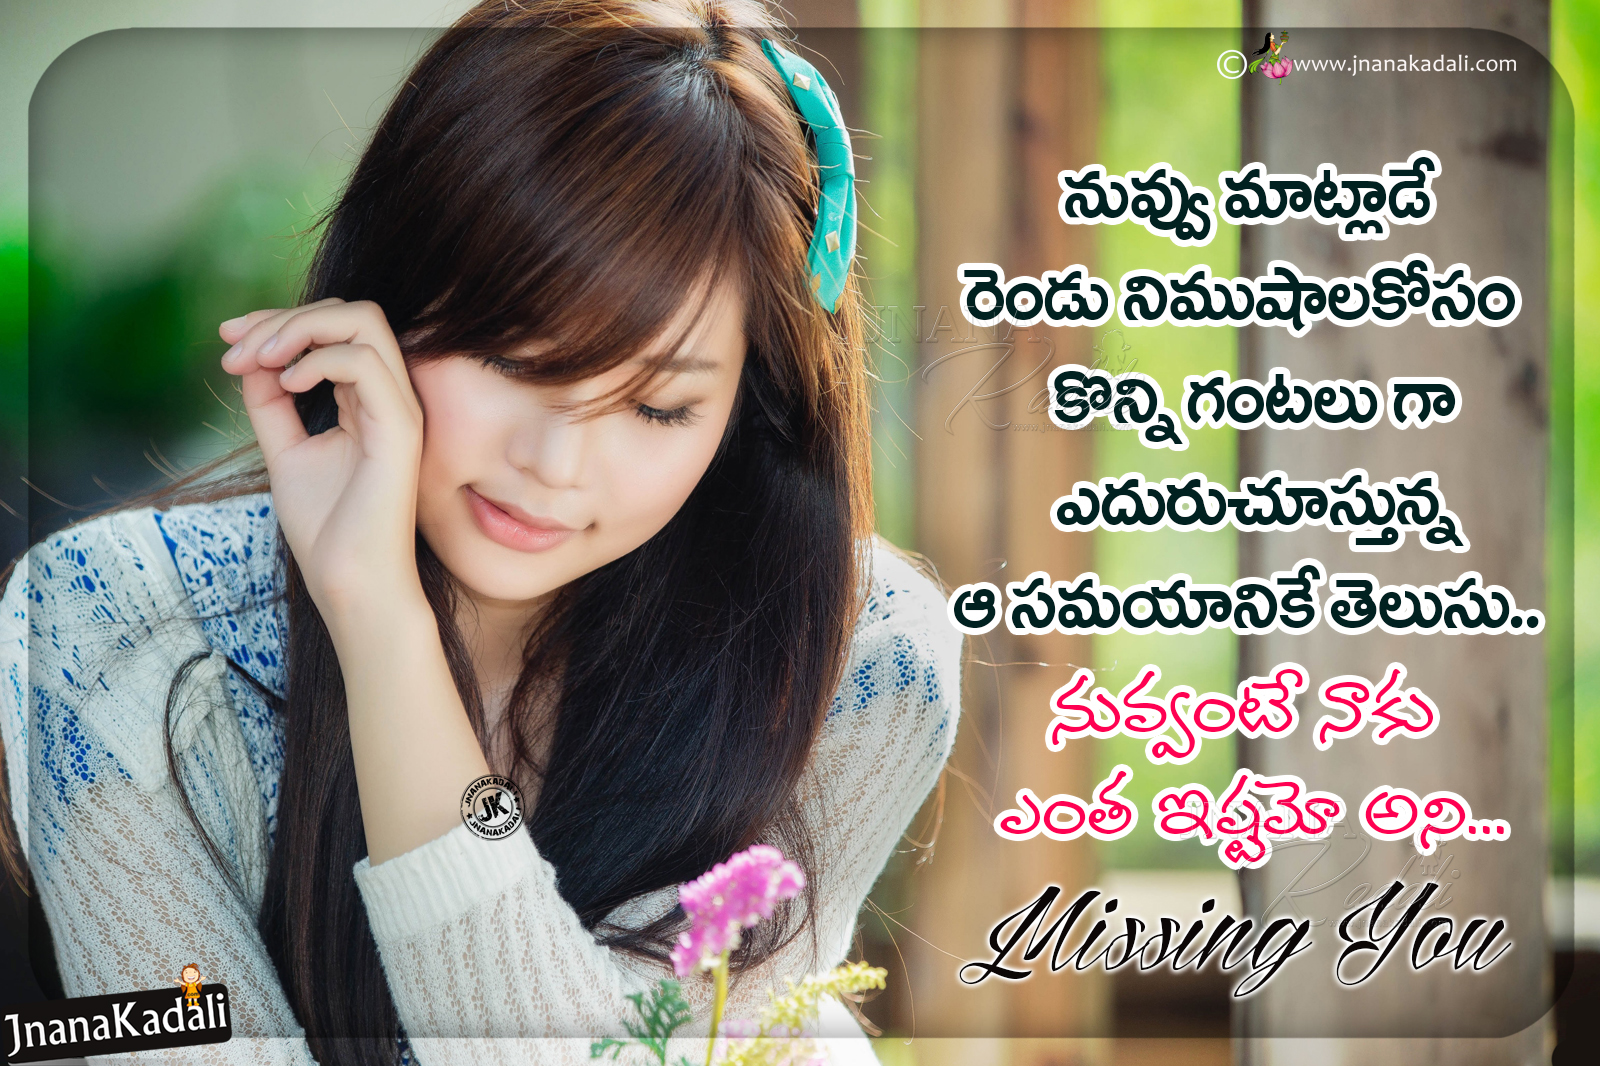 Alone Girl Hd Wallpapers with Quotes on Love-Best Love Quotes in Telugu  With Hd Wallpapers | JNANA  |Telugu Quotes|English quotes|Hindi  quotes|Tamil quotes|Dharmasandehalu|